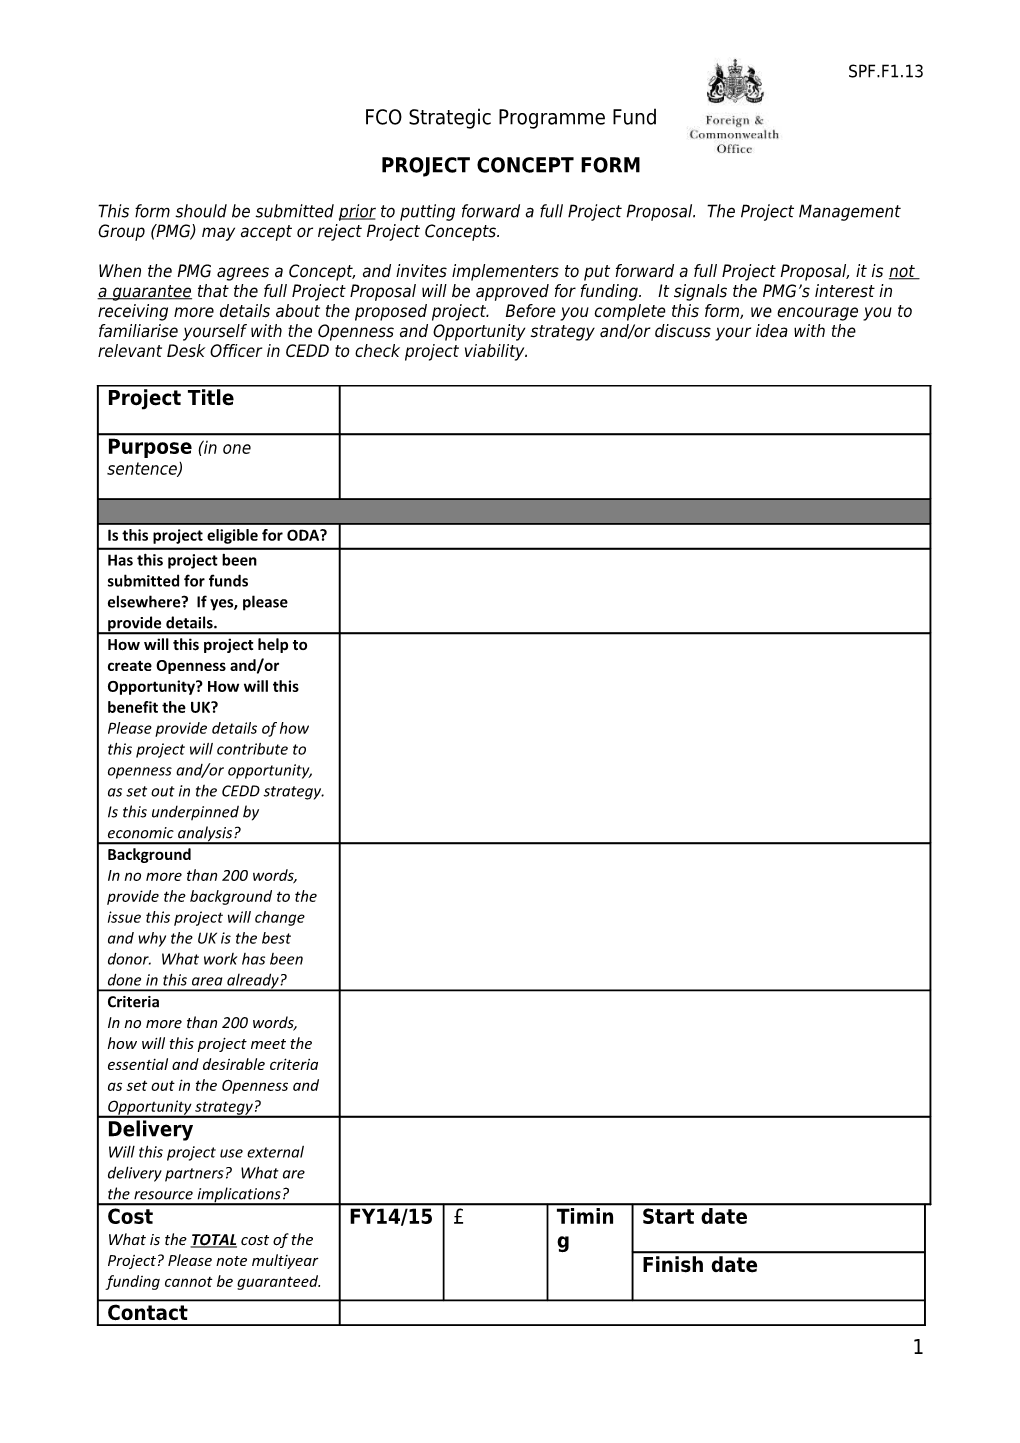 New Project Proposal Form Oct 12 s1